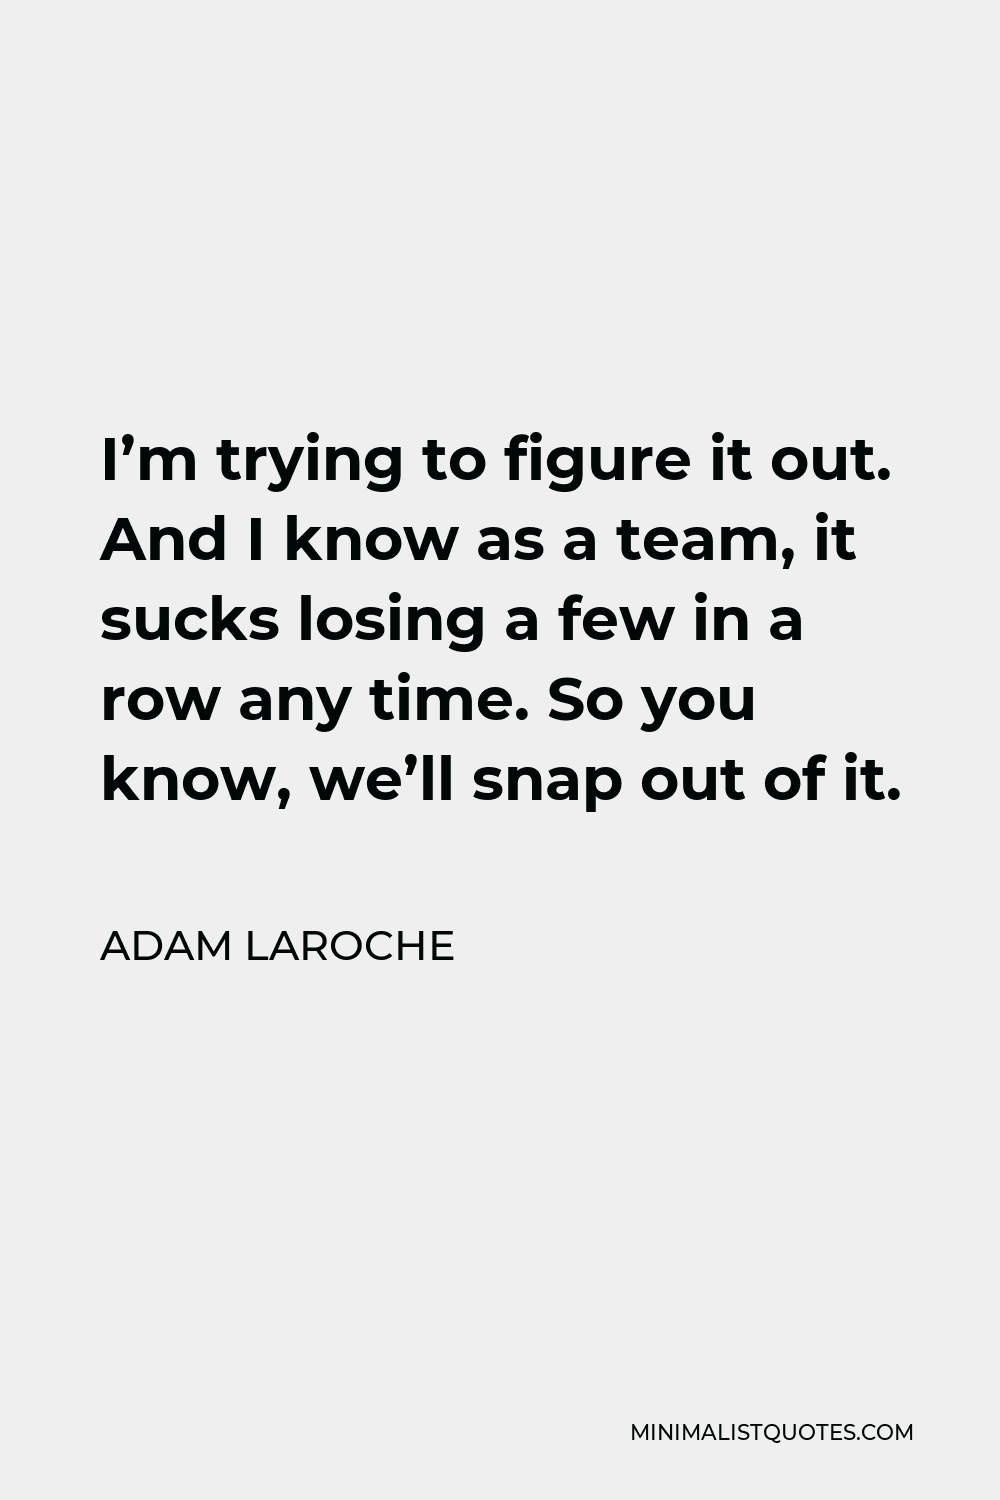 Adam LaRoche Quote - I’m trying to figure it out. And I know as a team, it sucks losing a few in a row any time. So you know, we’ll snap out of it.